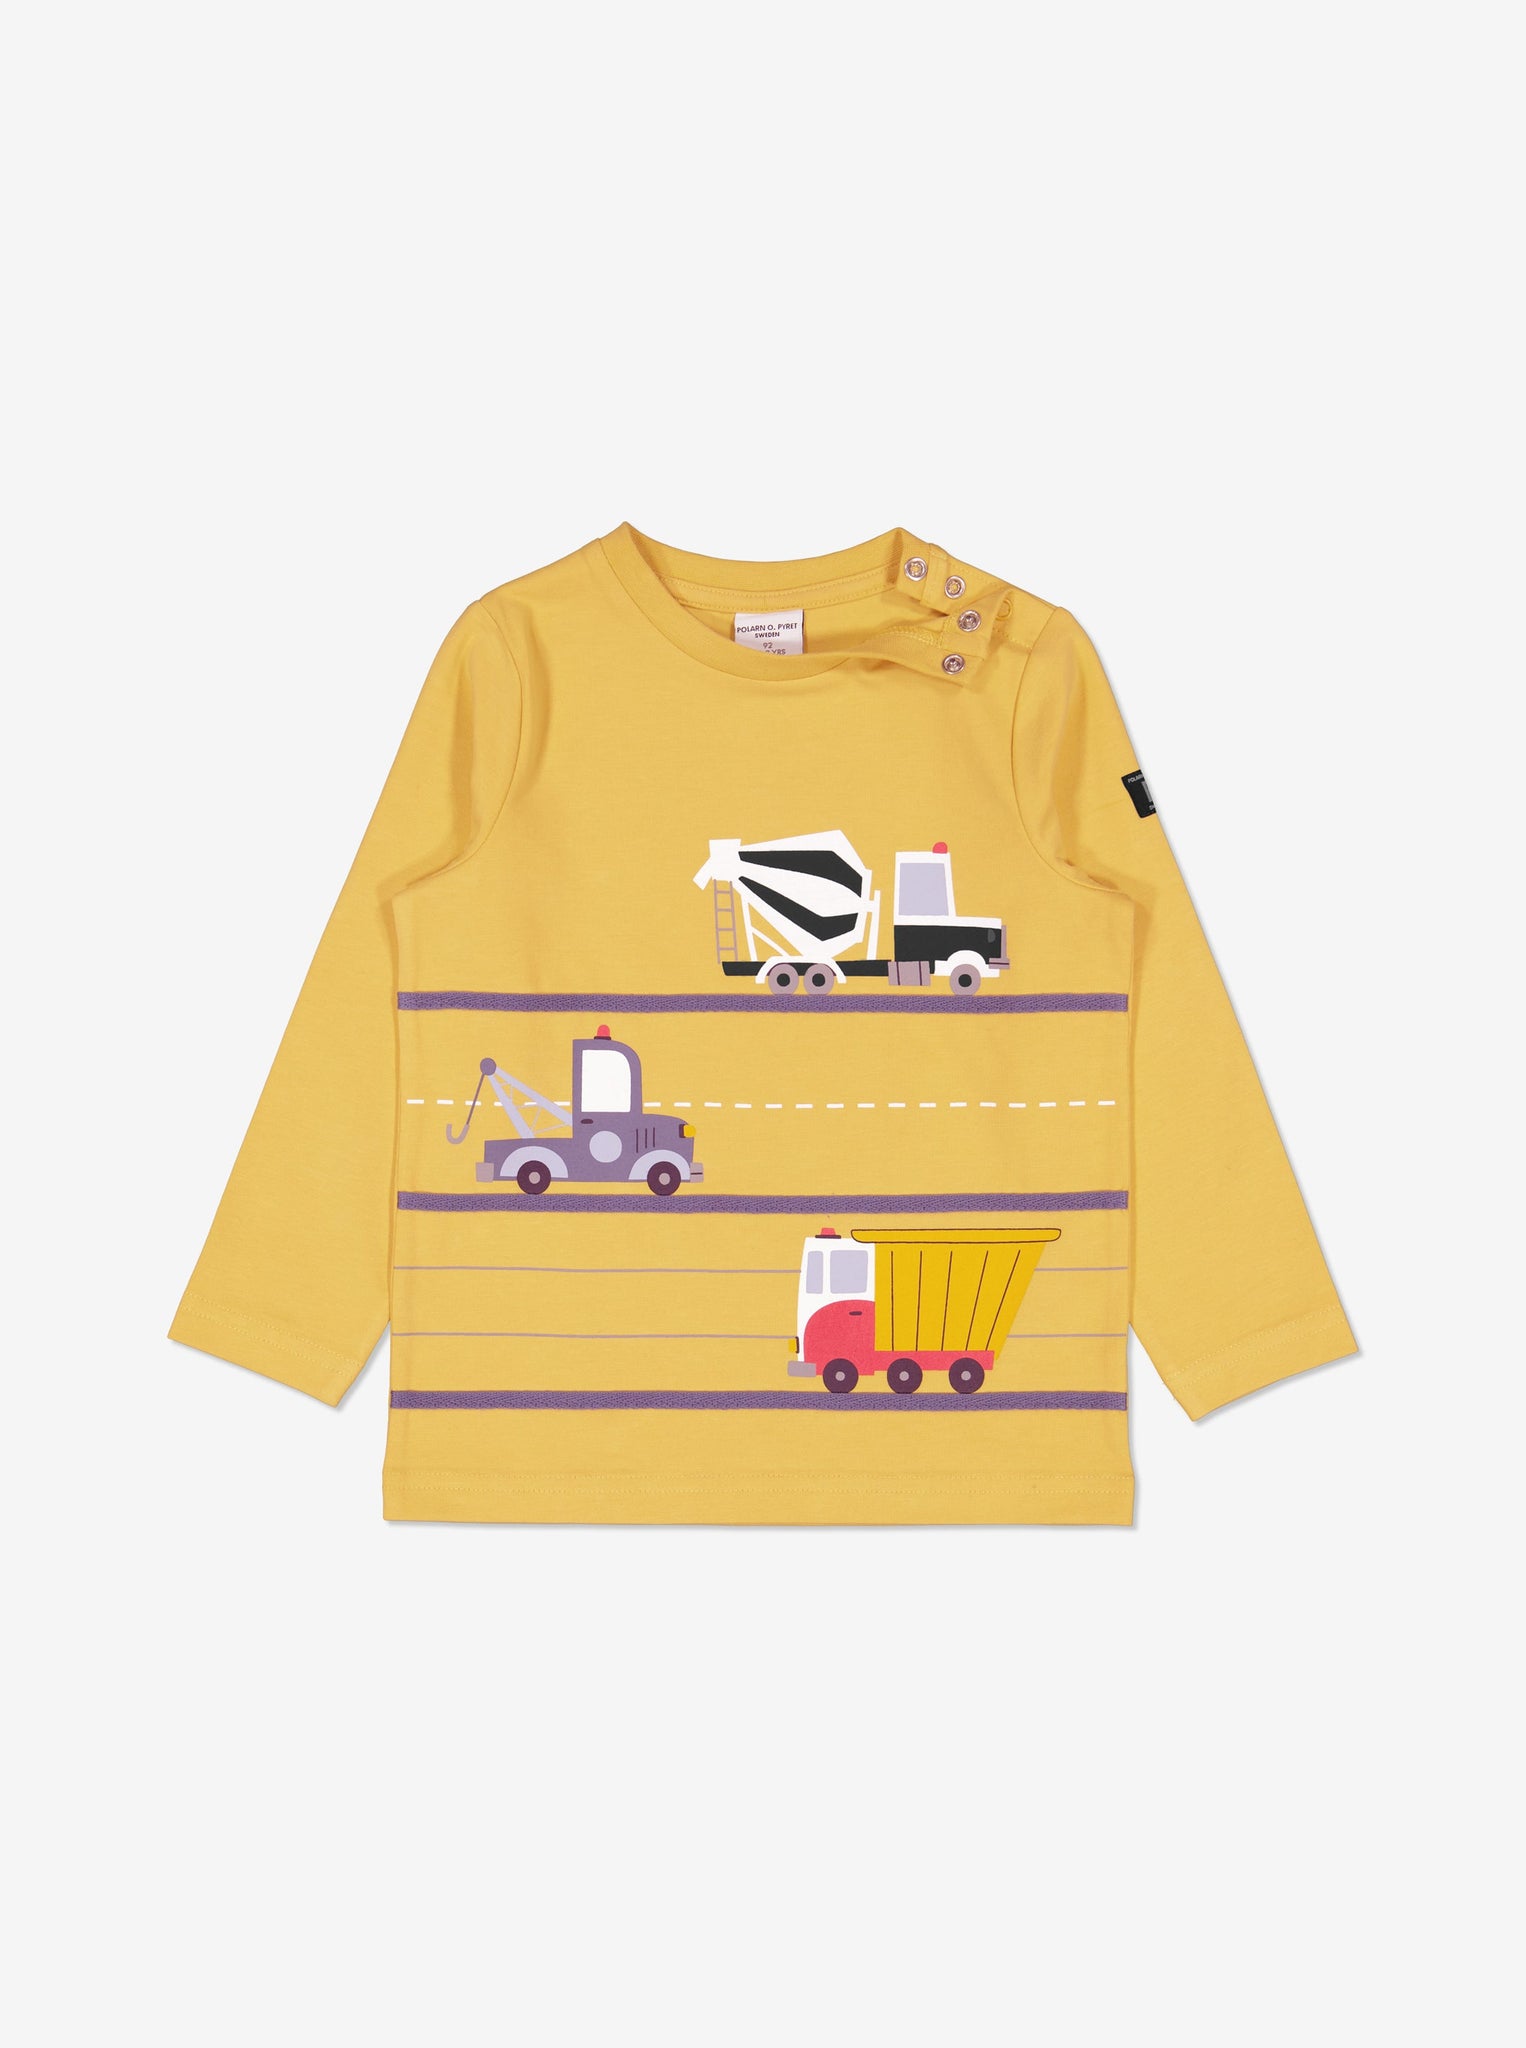  Yellow Truck Print Baby Top from Polarn O. Pyret Kidswear. Made using sustainable materials.